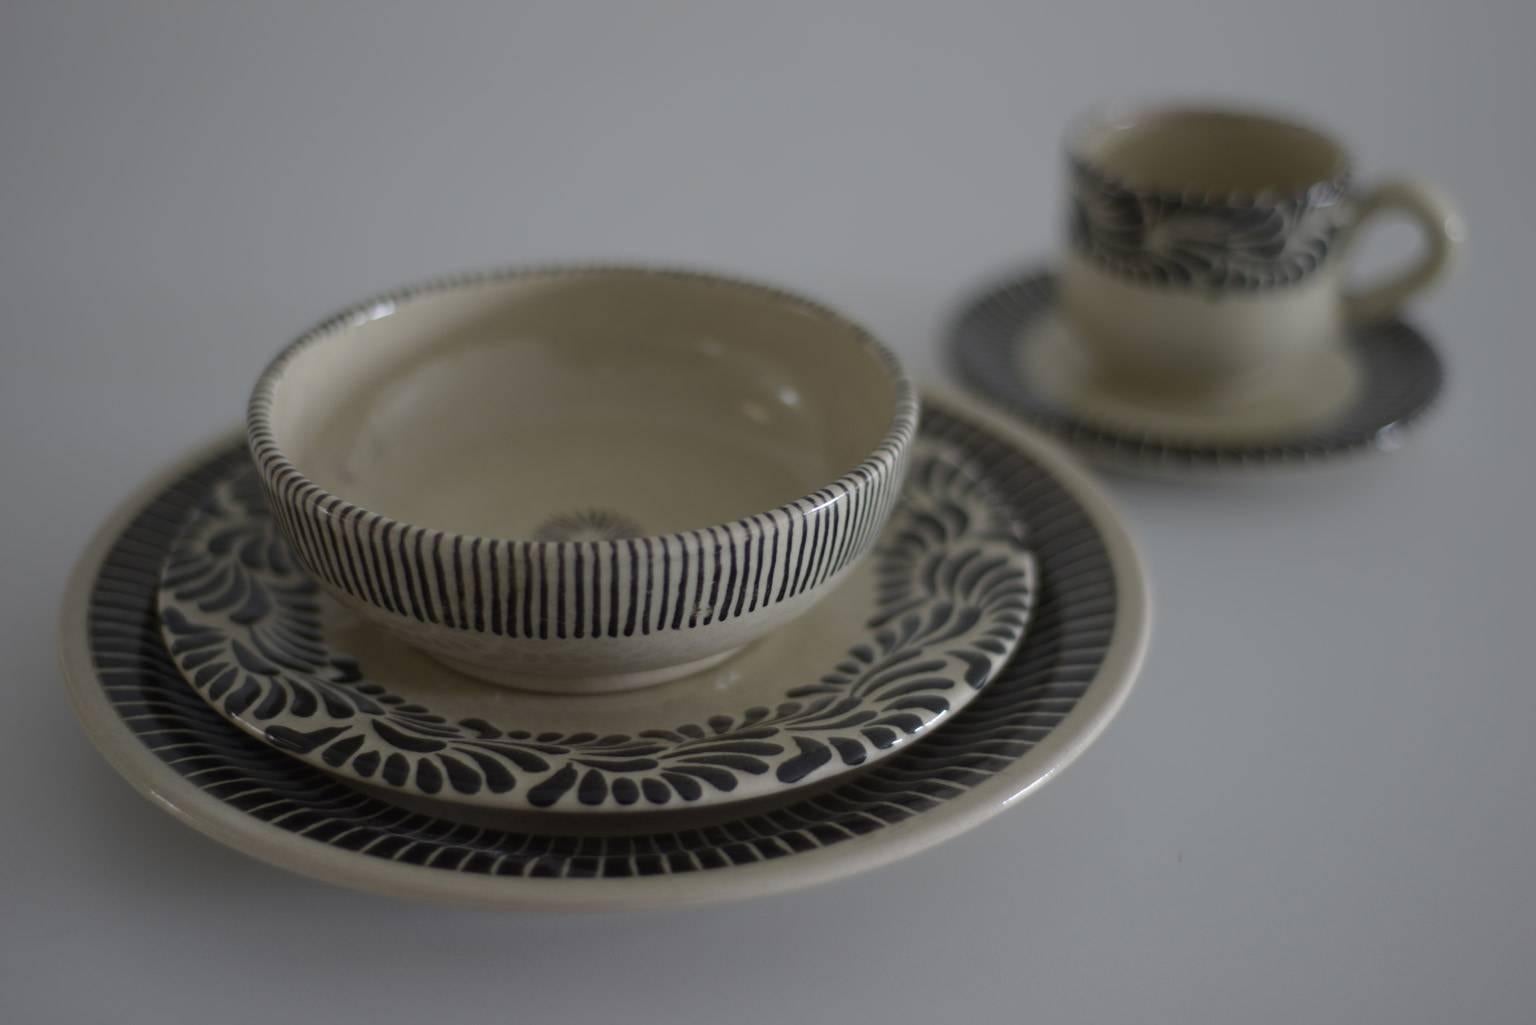 black and white tableware